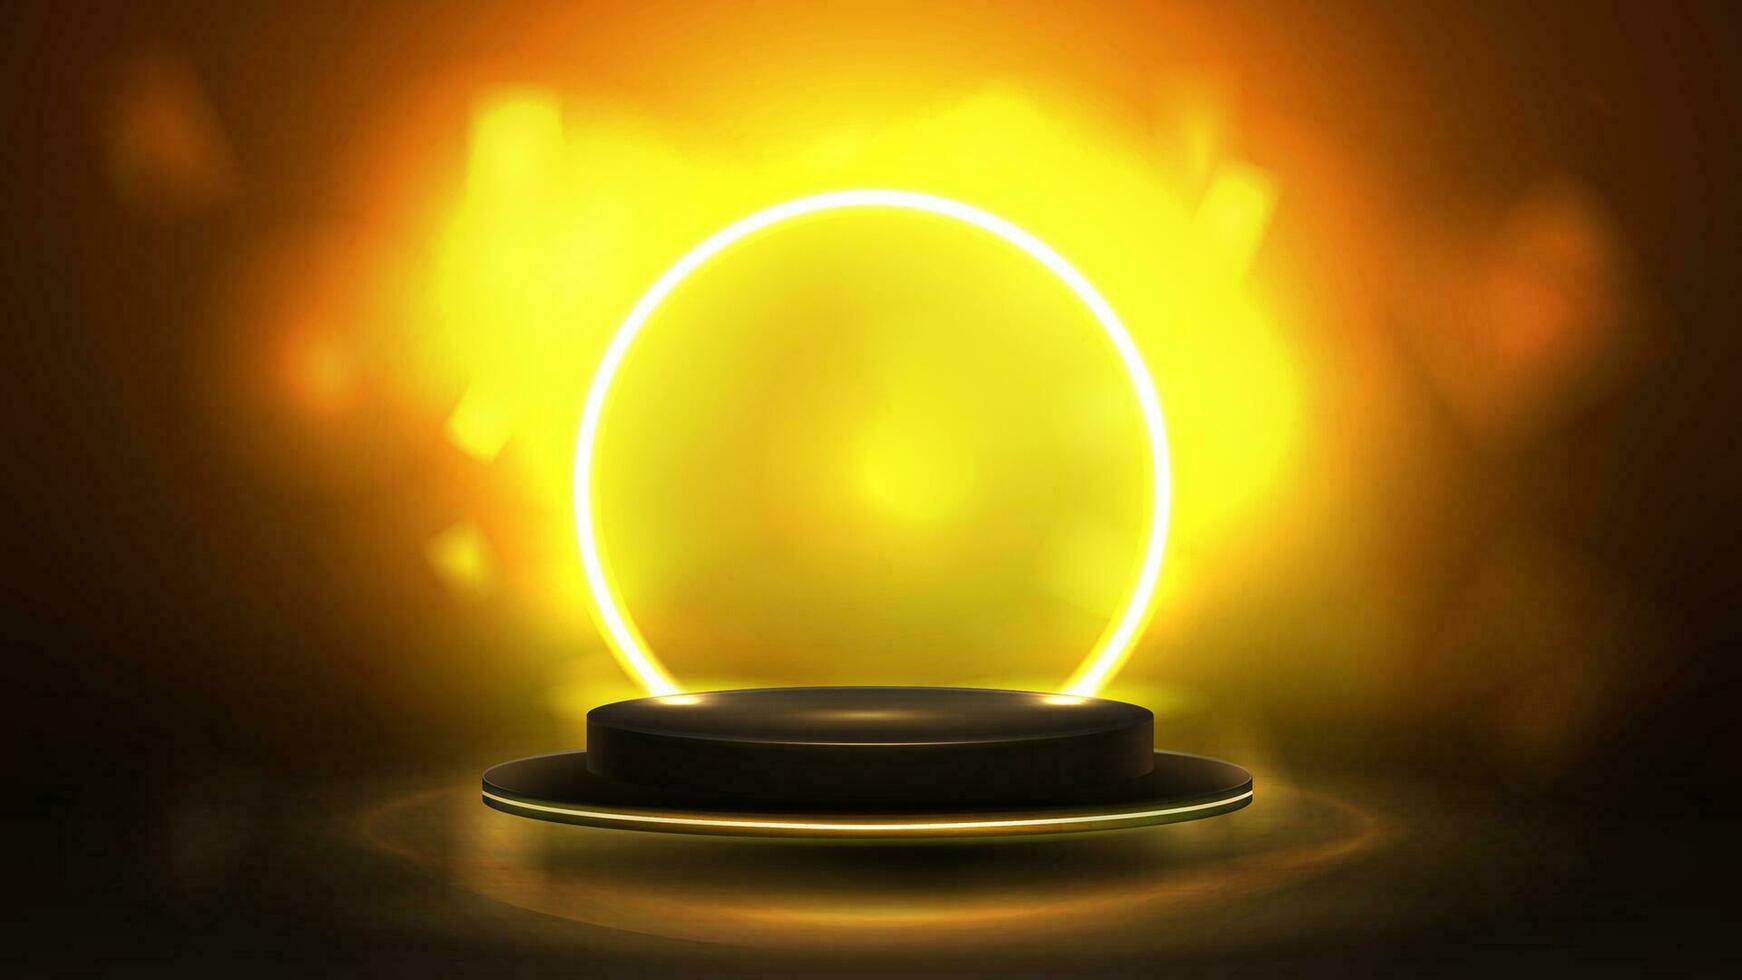 Empty gold and black podium floating in the air with yellow neon ring and blurred background, 3d realistic vector illustration.